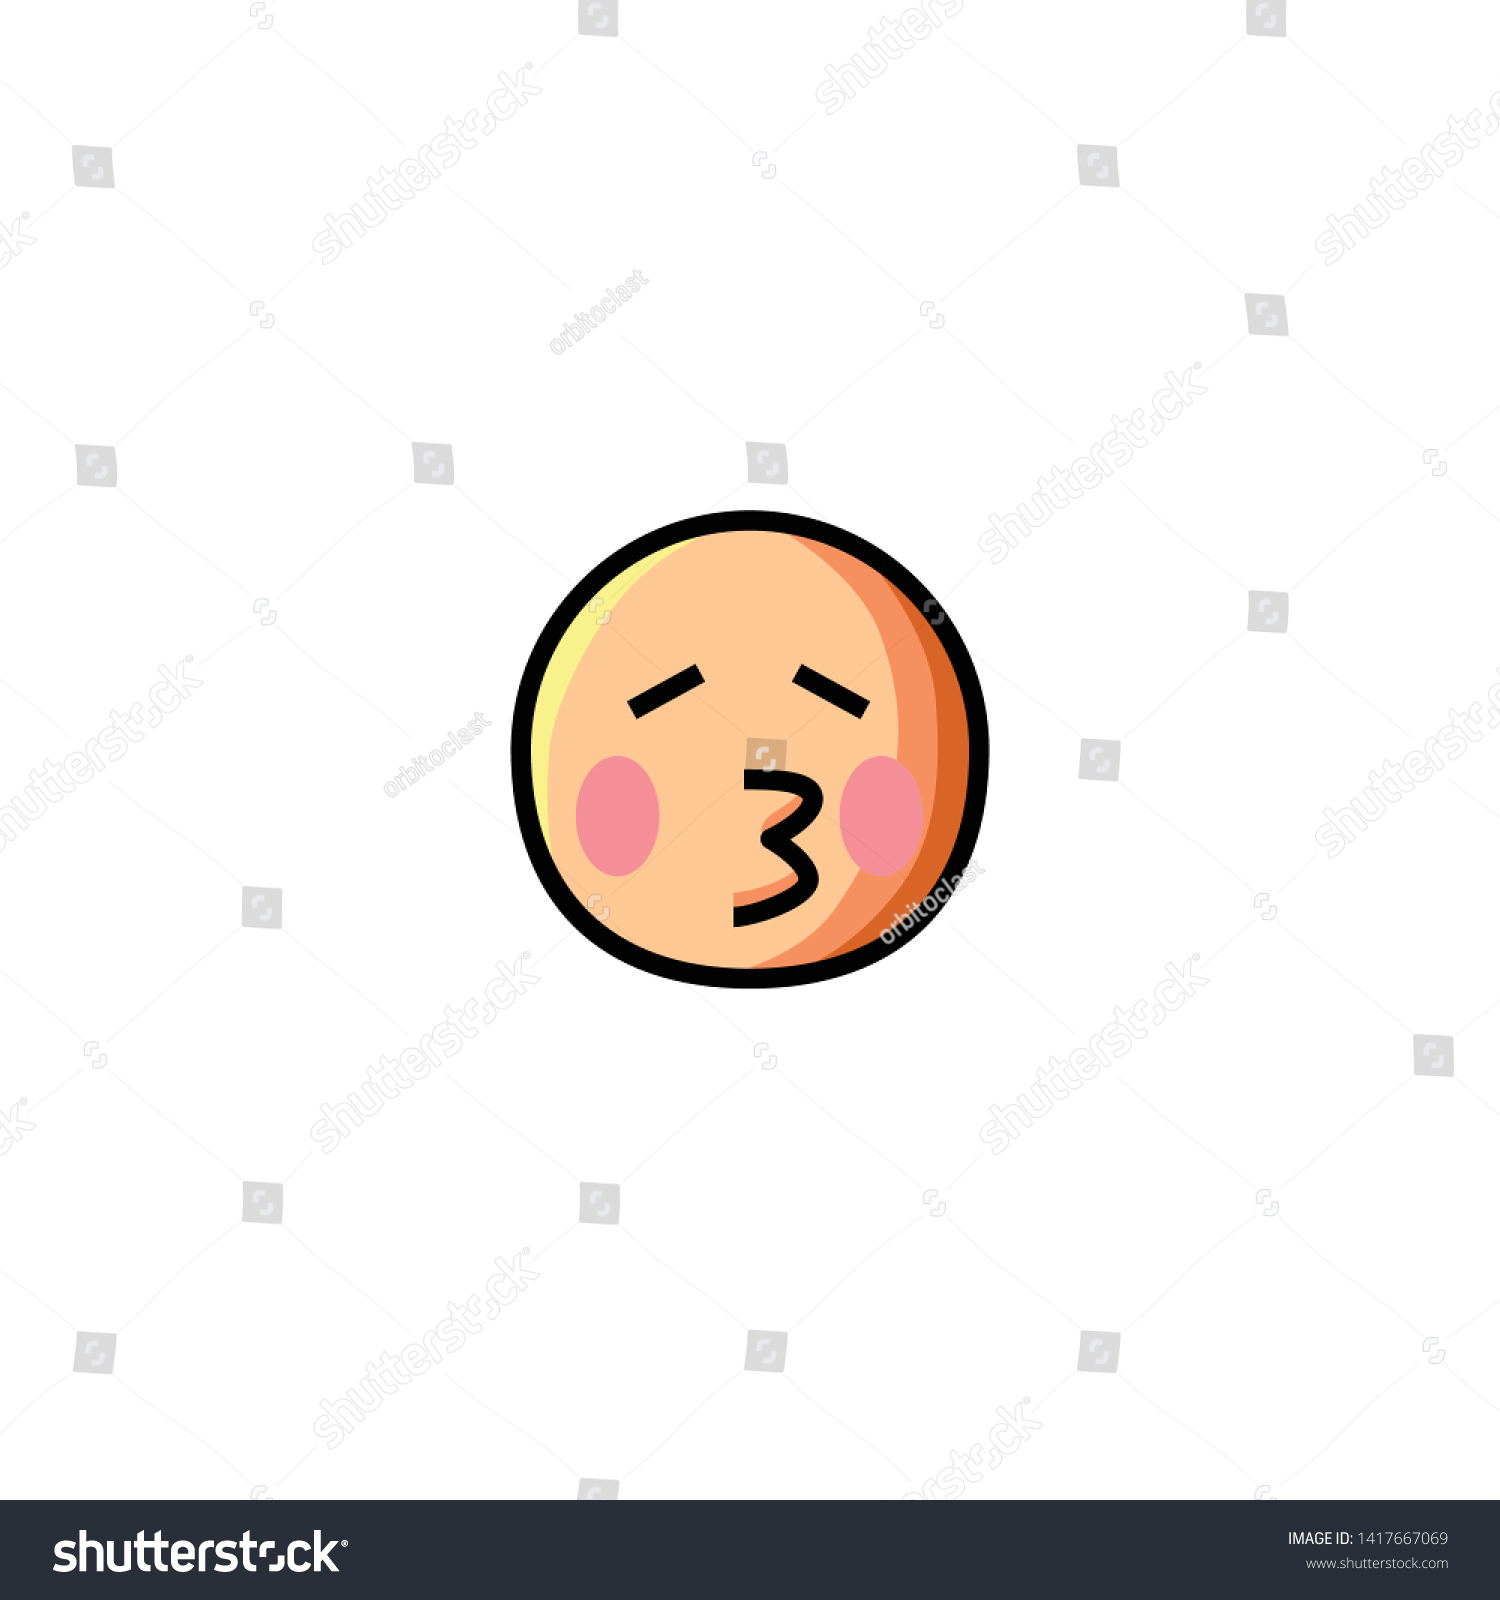 SVG of Isolate Face Blowing a Kiss Vector Icon, Emoticon svg